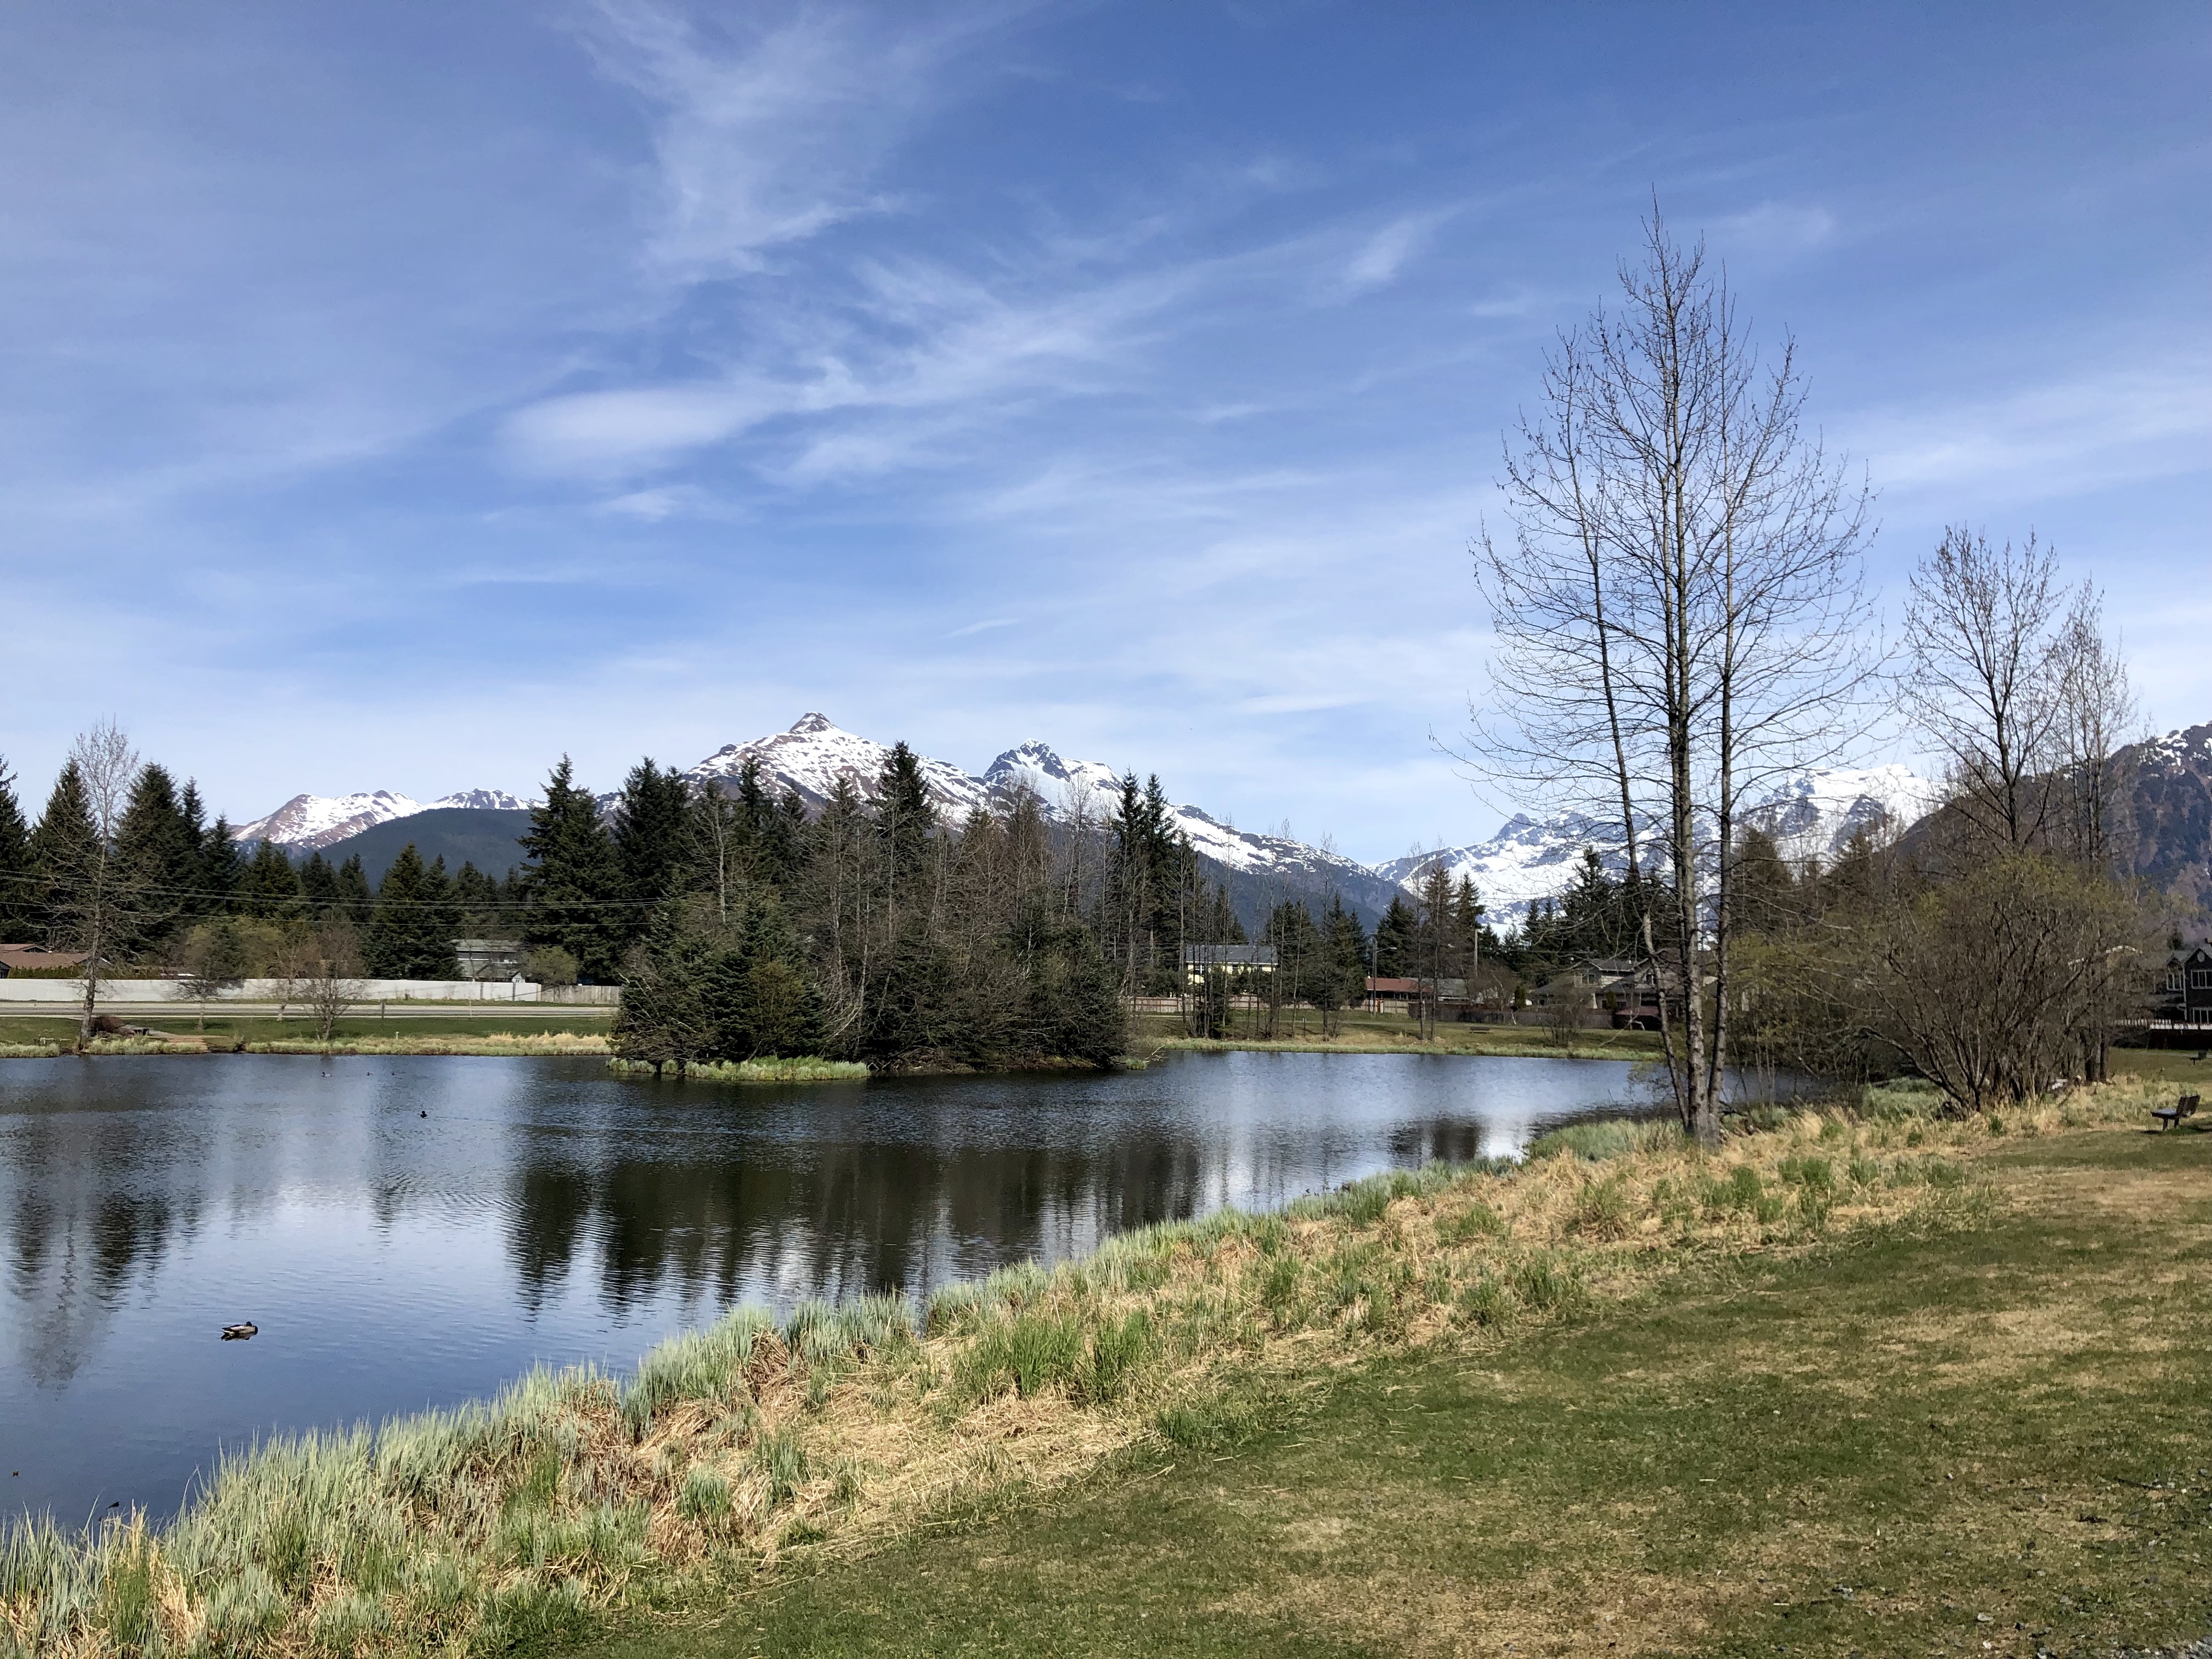 Riverside Rotary Park with snow capped mountains in the background.